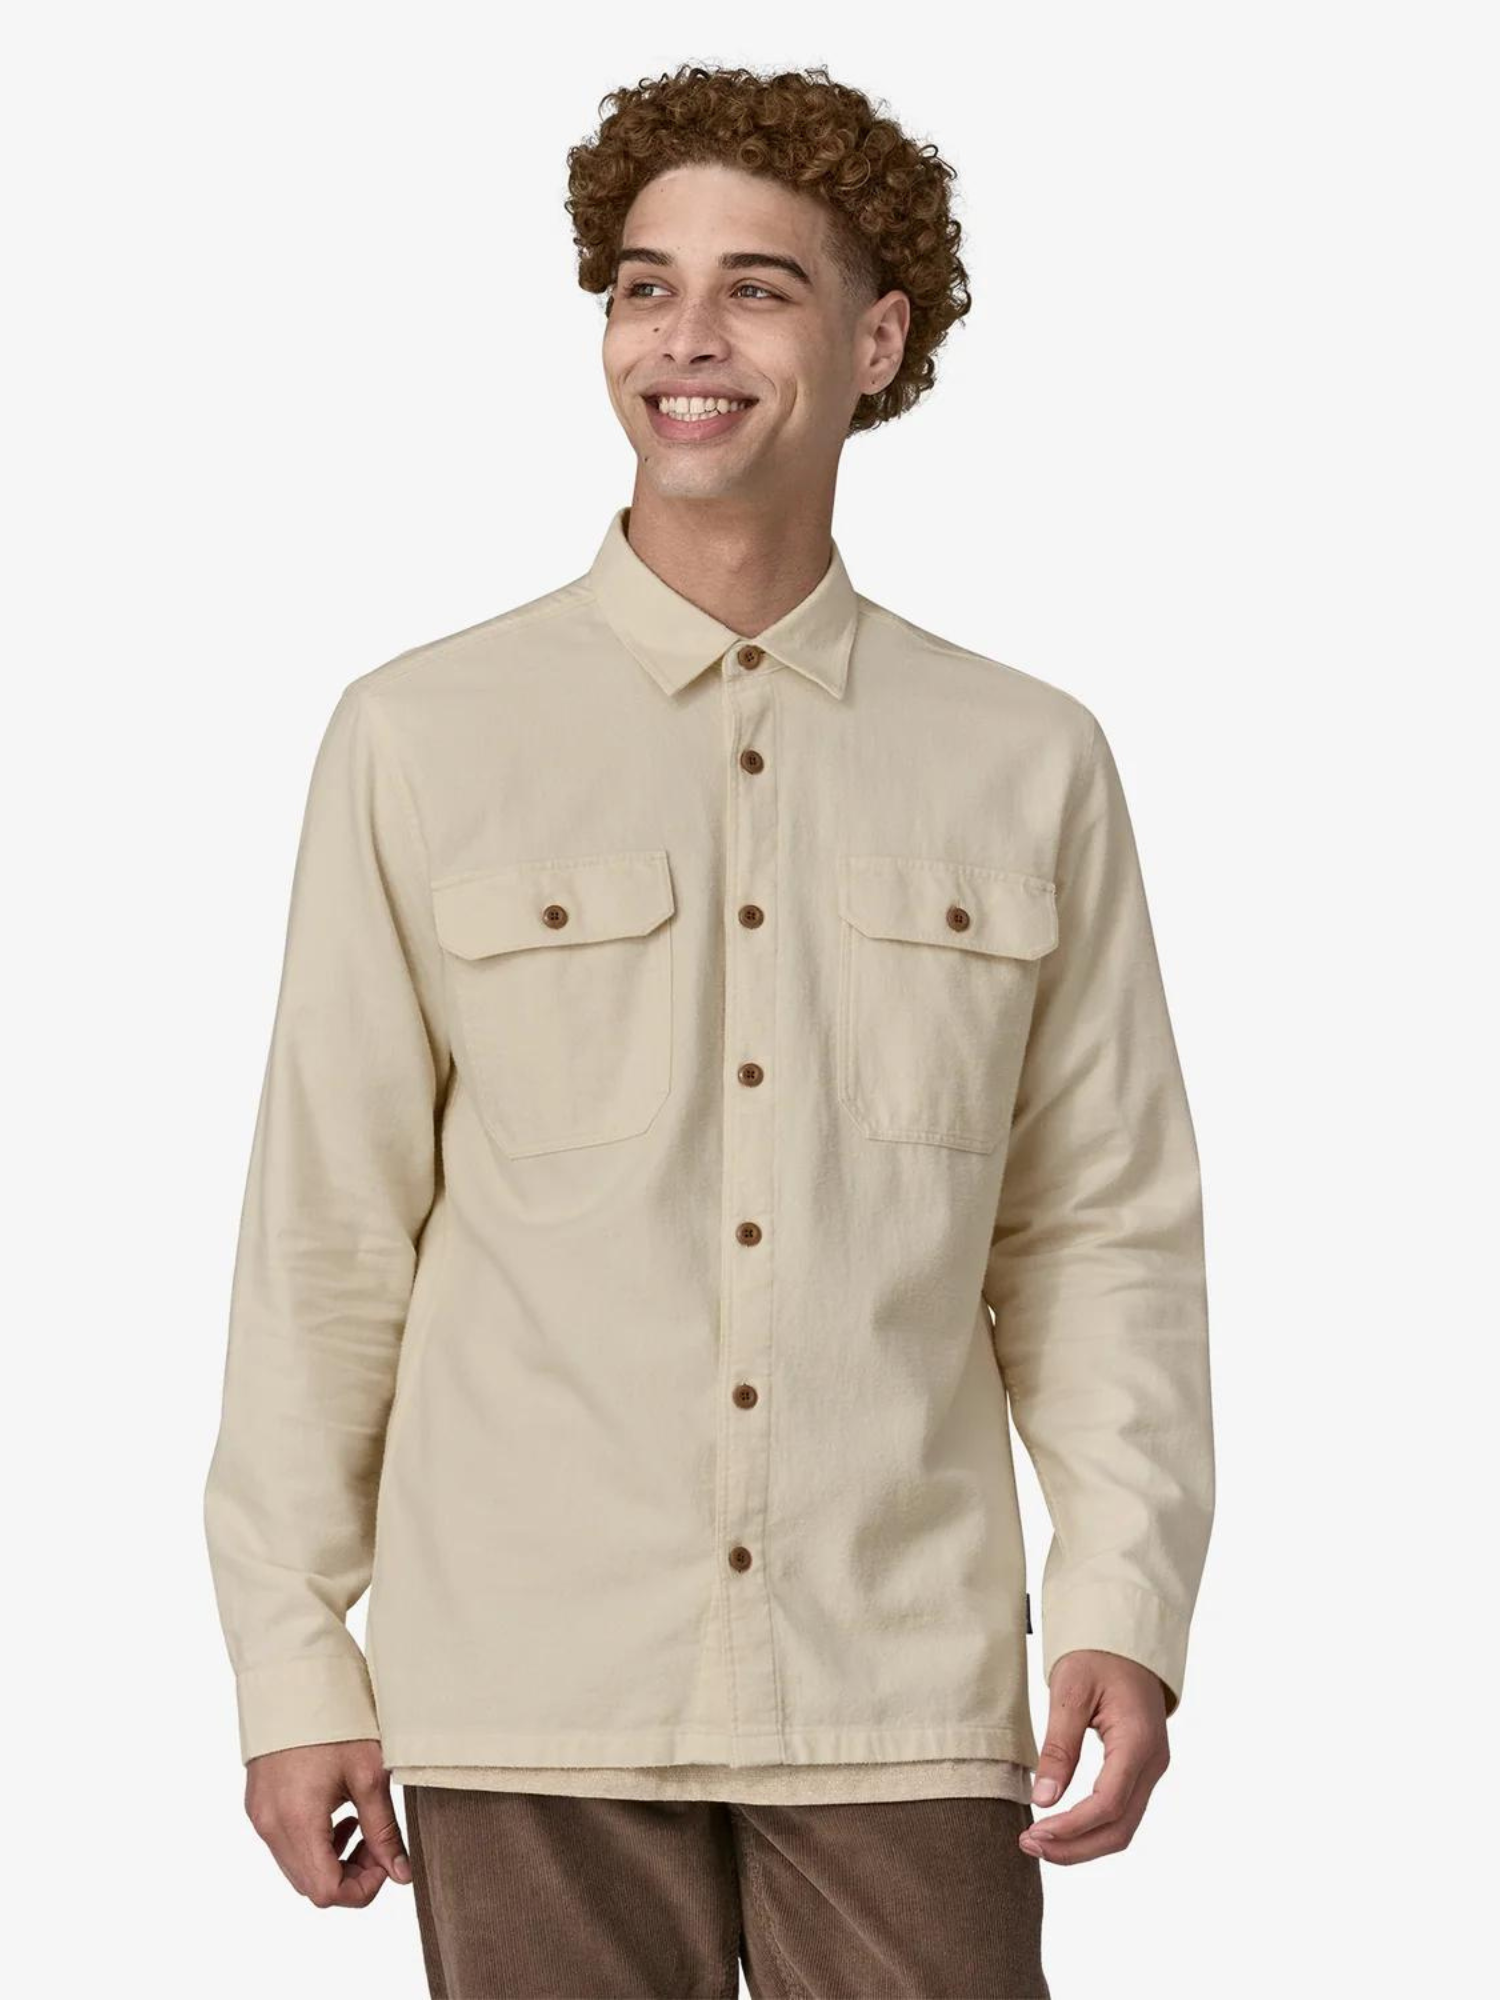 Patagonia Men's Long-Sleeved Organic Cotton Midweight Fjord Flannel Shirt - Undyed Natural